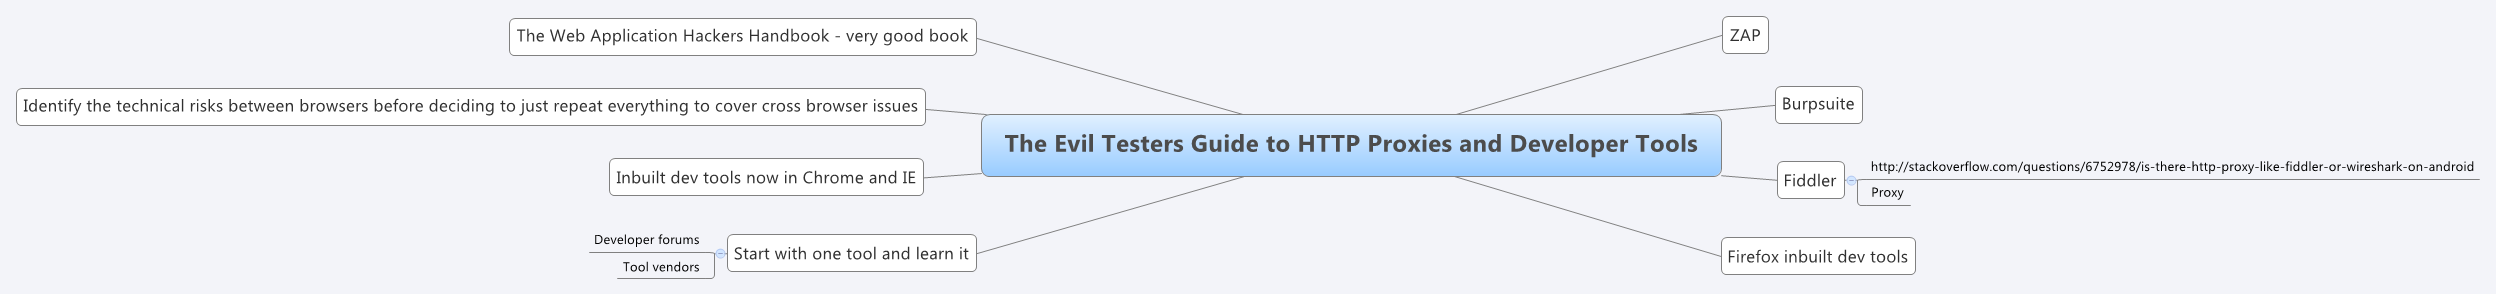 The Evil Testers Guide to HTTP Proxies and Developer Tools